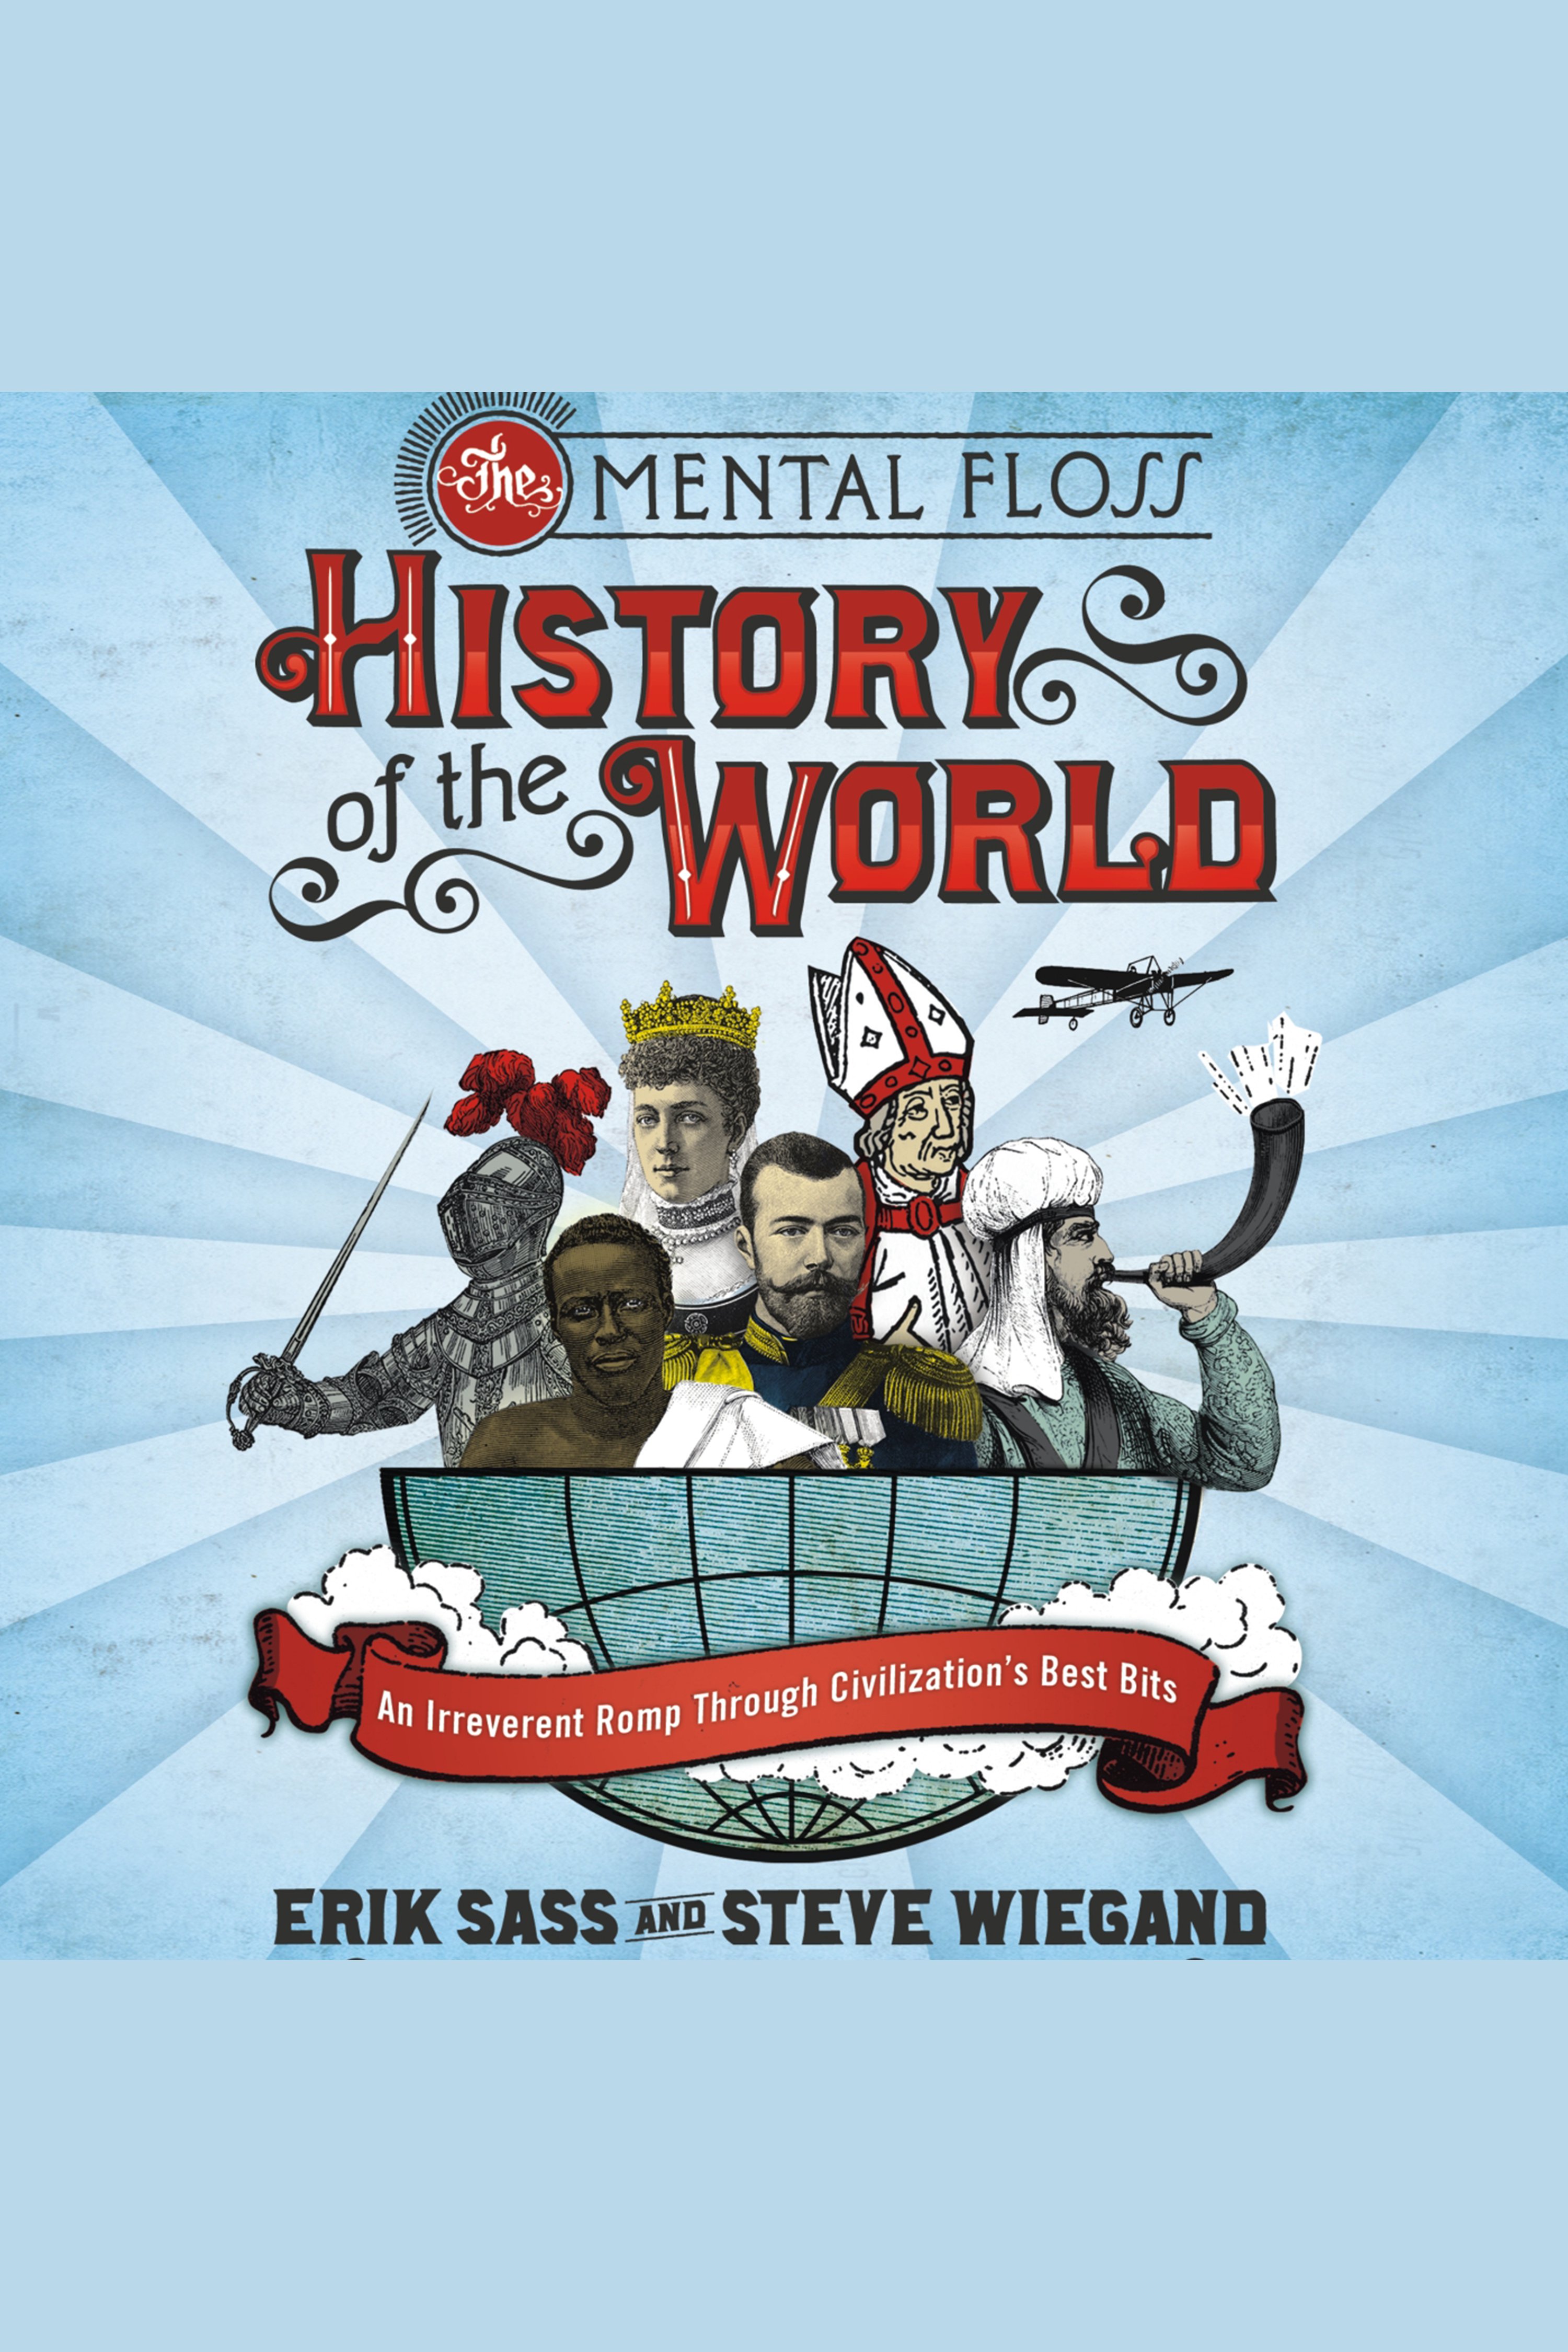 The mental floss history of the world an irreverent romp through civilization's best bits cover image